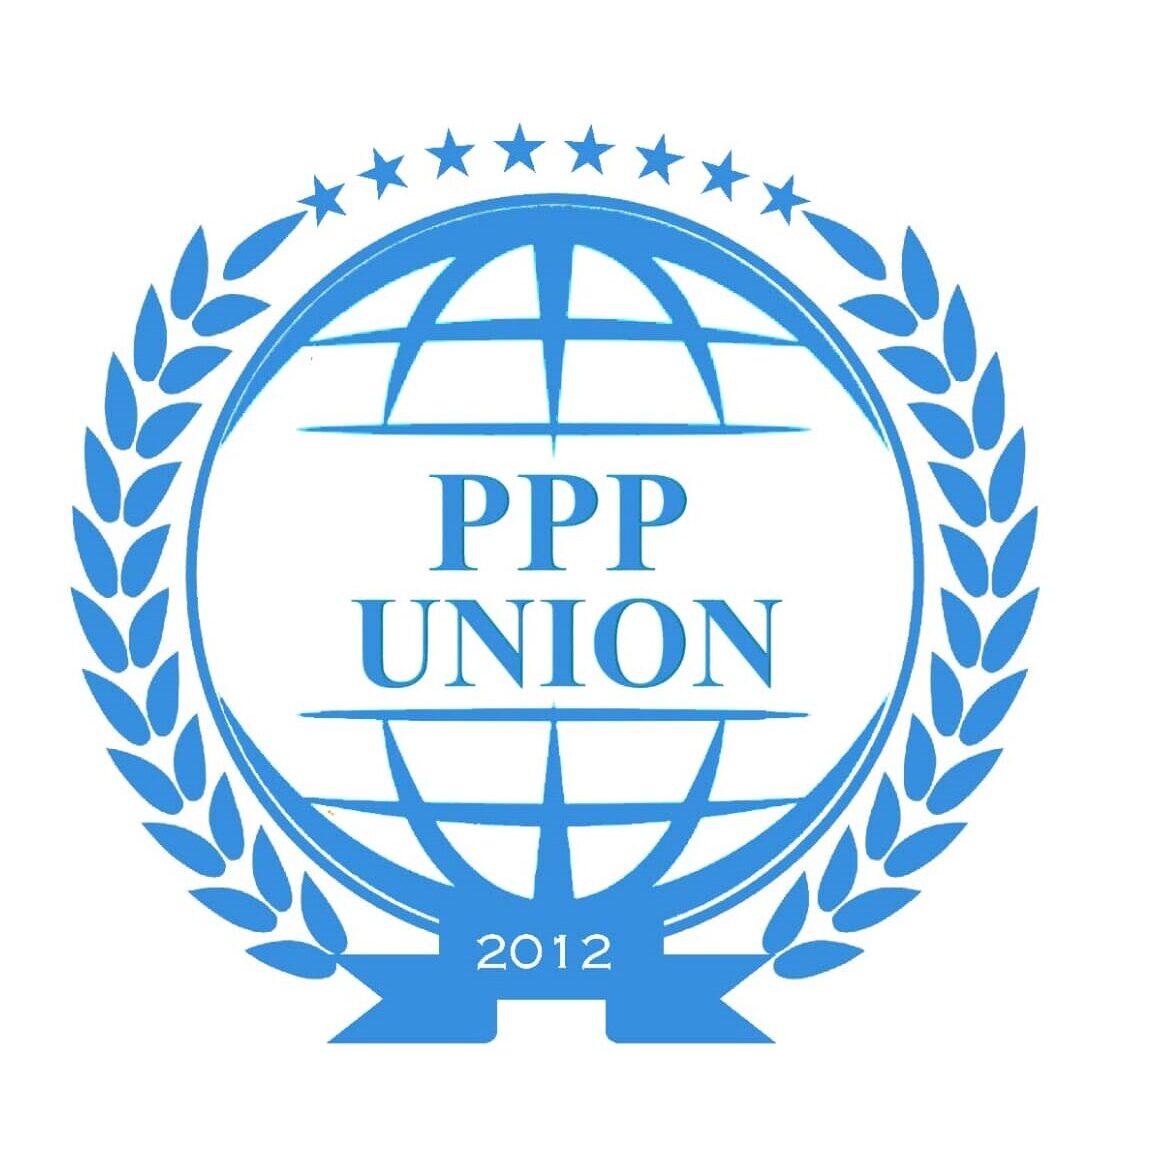 PPP Union